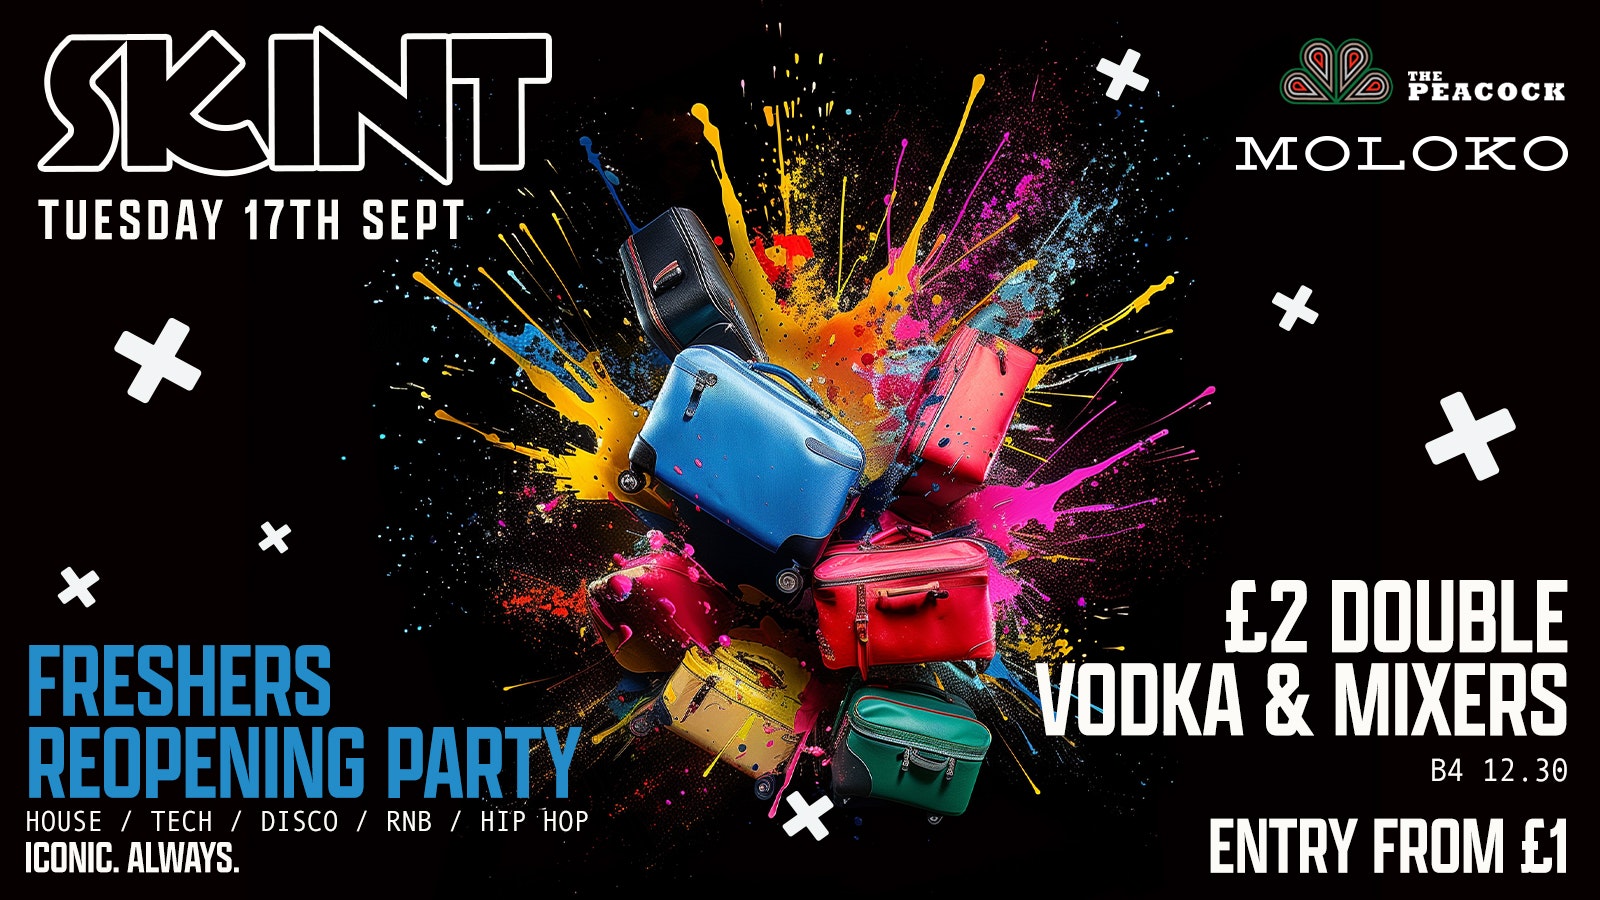 SKINT Tuesdays: FRESHERS REOPENING PARTY – £2 DOUBLES!